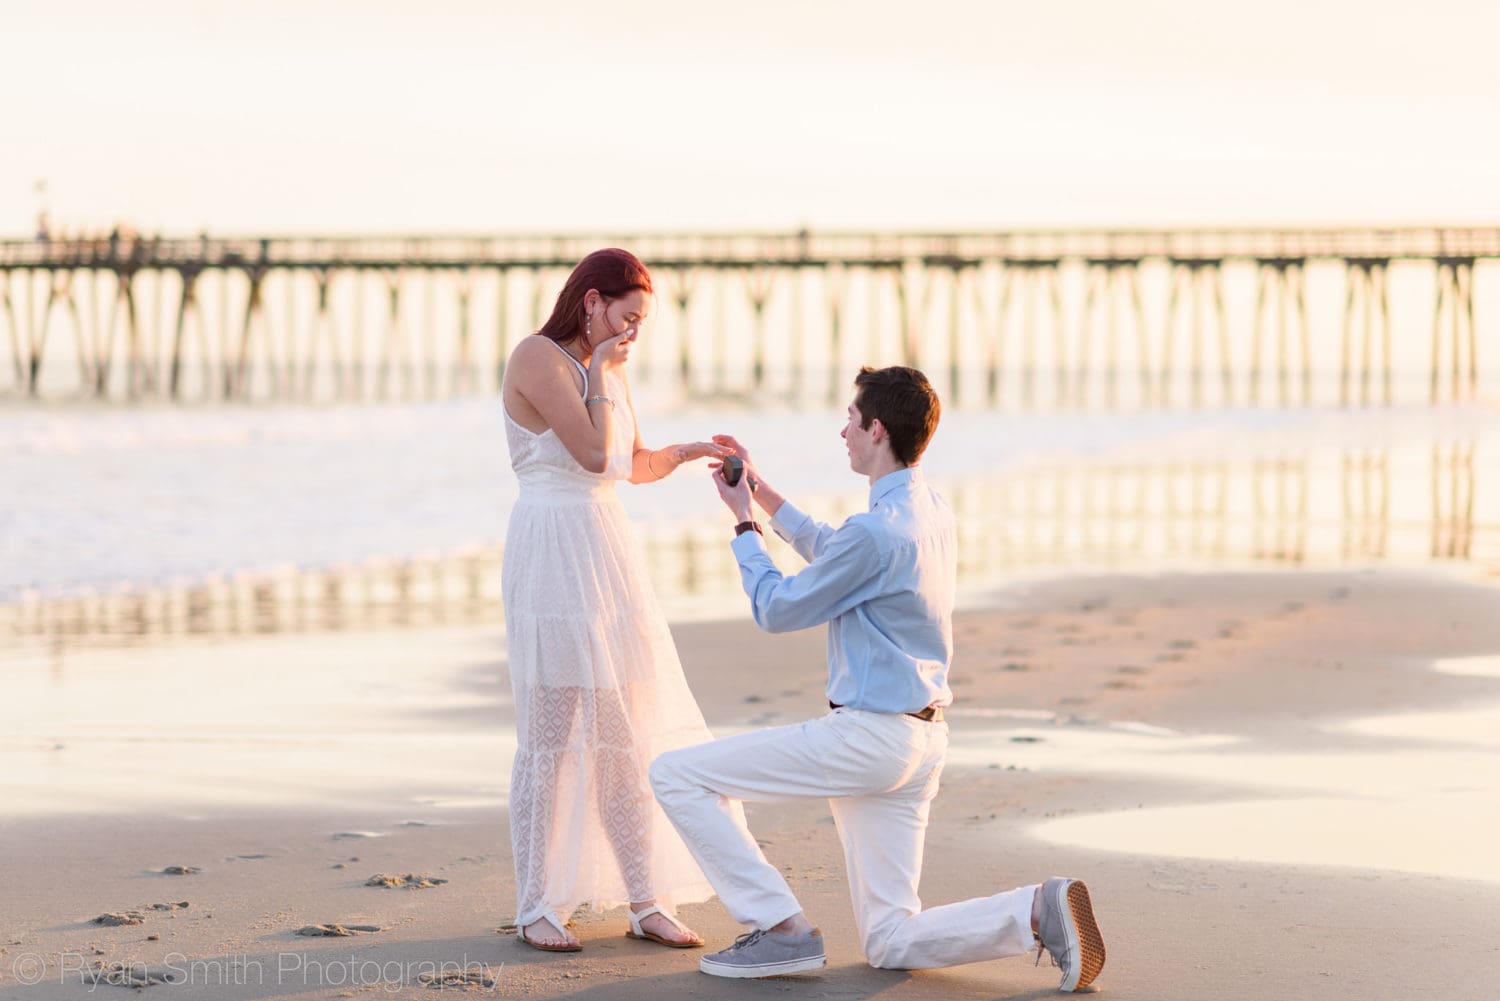 Putting on the ring after surprise marriage proposal - Myrtle Beach State Park